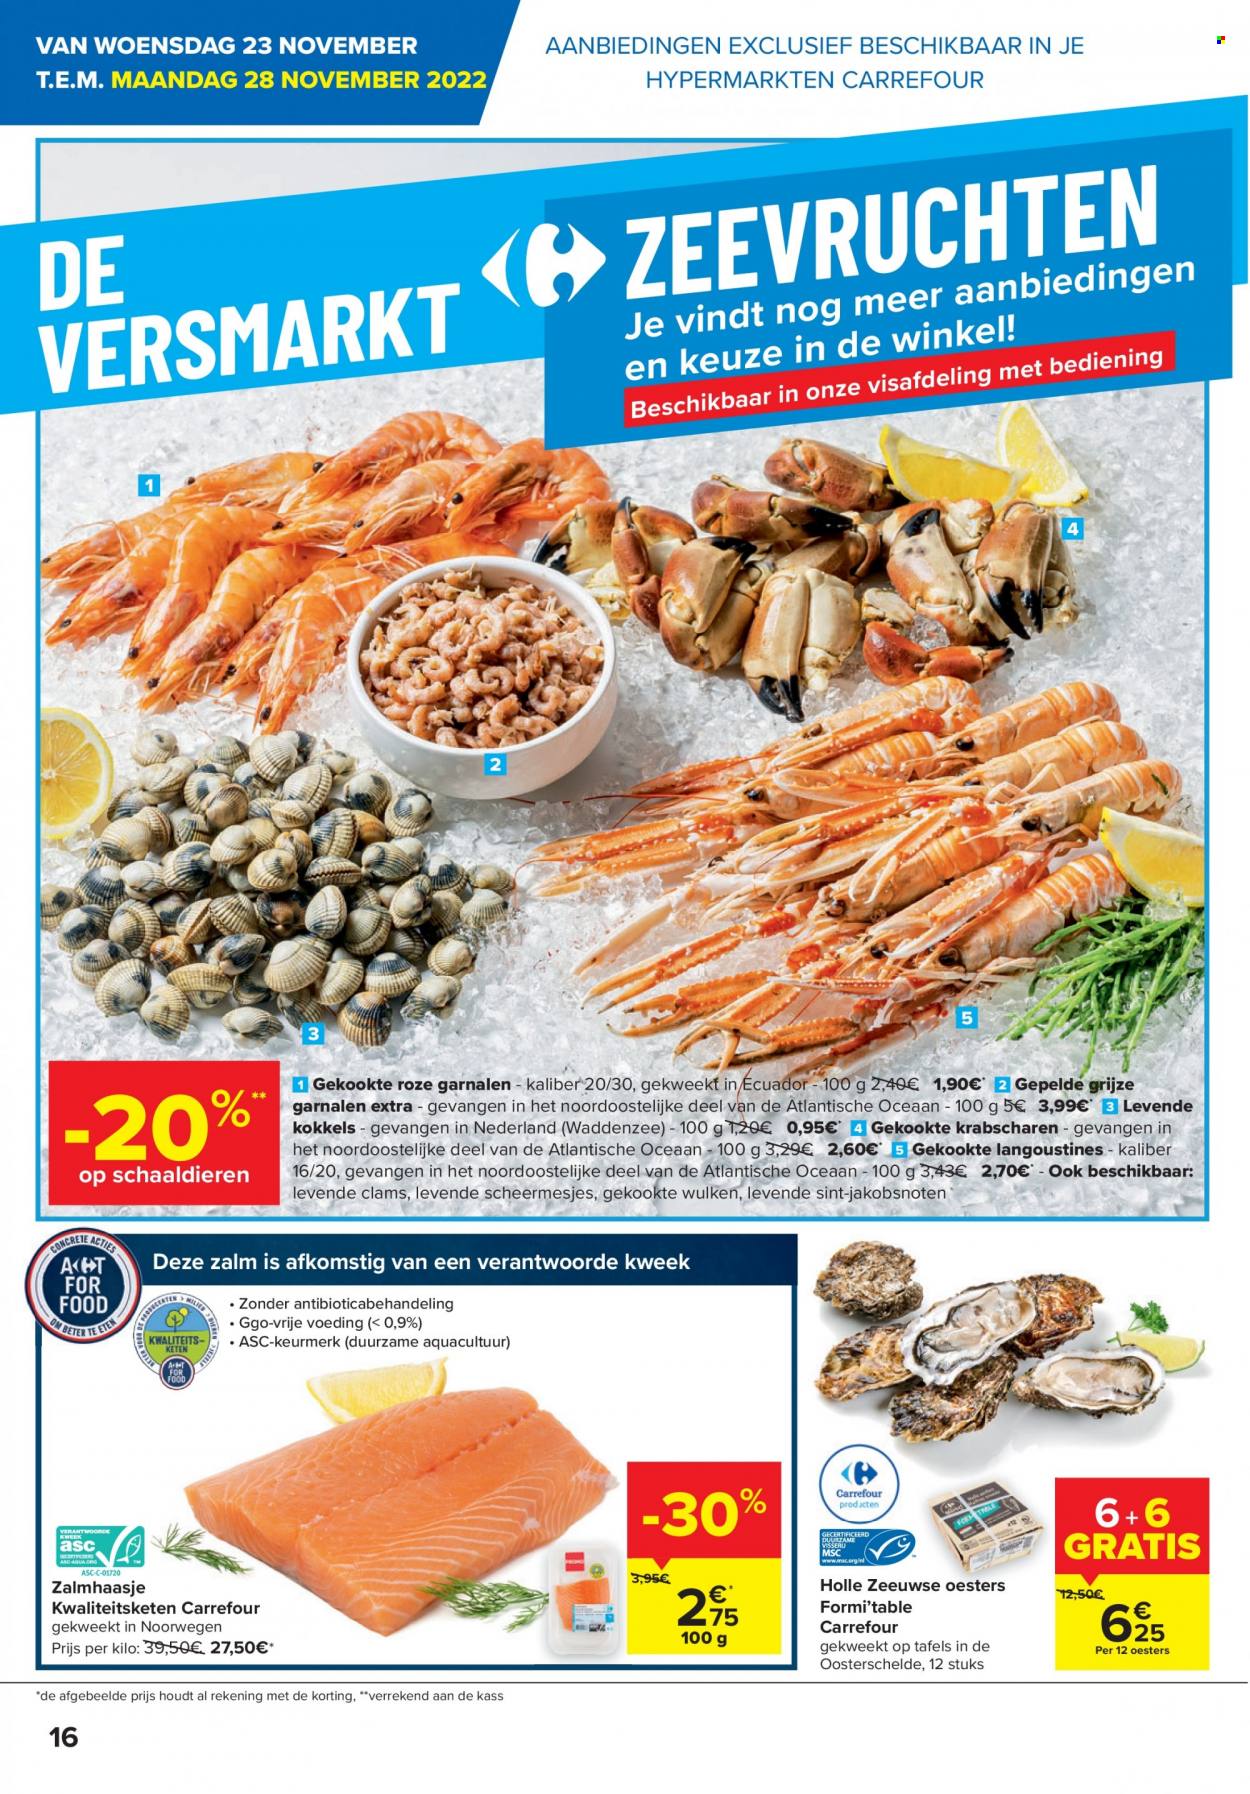 Catalogue Carrefour hypermarkt - 23.11.2022 - 5.12.2022. Page 16.